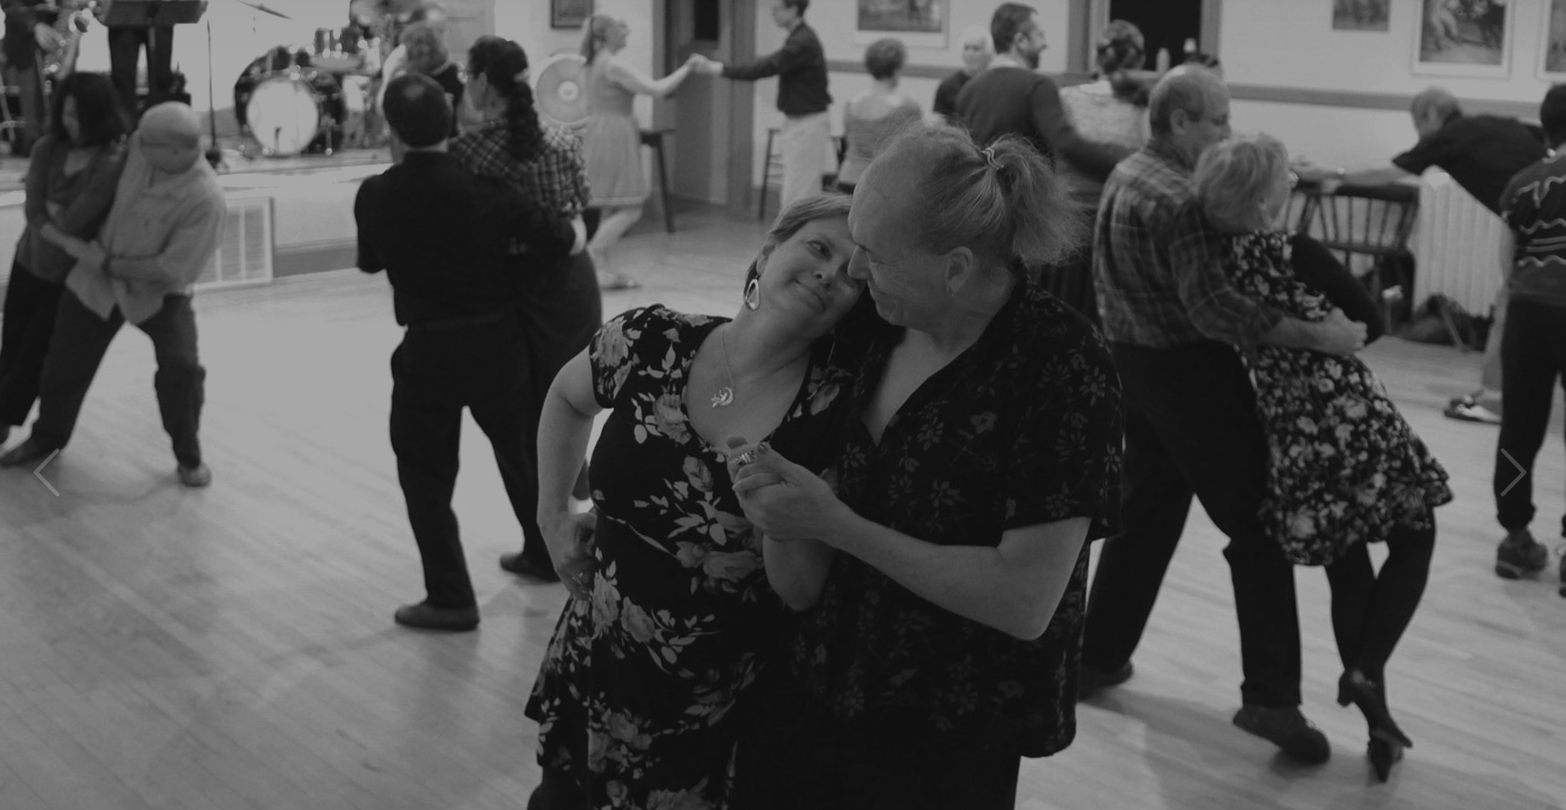 two people dancing together